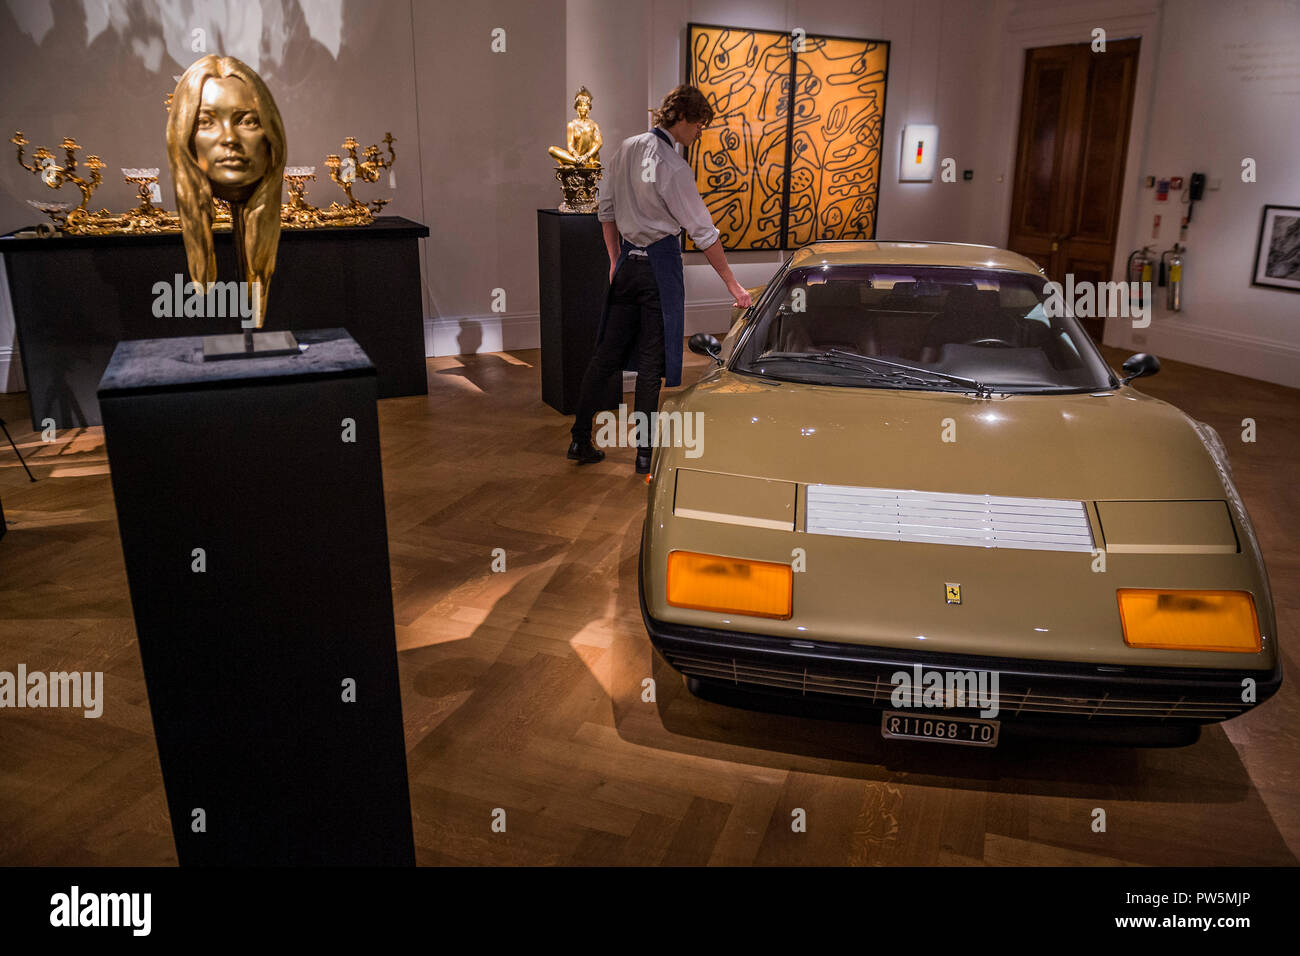 London, UK. 12th Oct 2018. A bust of Kate Moss in solid 18-carat gold by Marc Quinn, est £300-400,000 and a 1977 Gold Ferrari 512 BB, est £350-450,000 - The Midas Touch, a preview of a forthcoming sale dedicated entirely to Gold, at Sotheby’s New Bond Street, London.. Credit: Guy Bell/Alamy Live News Stock Photo